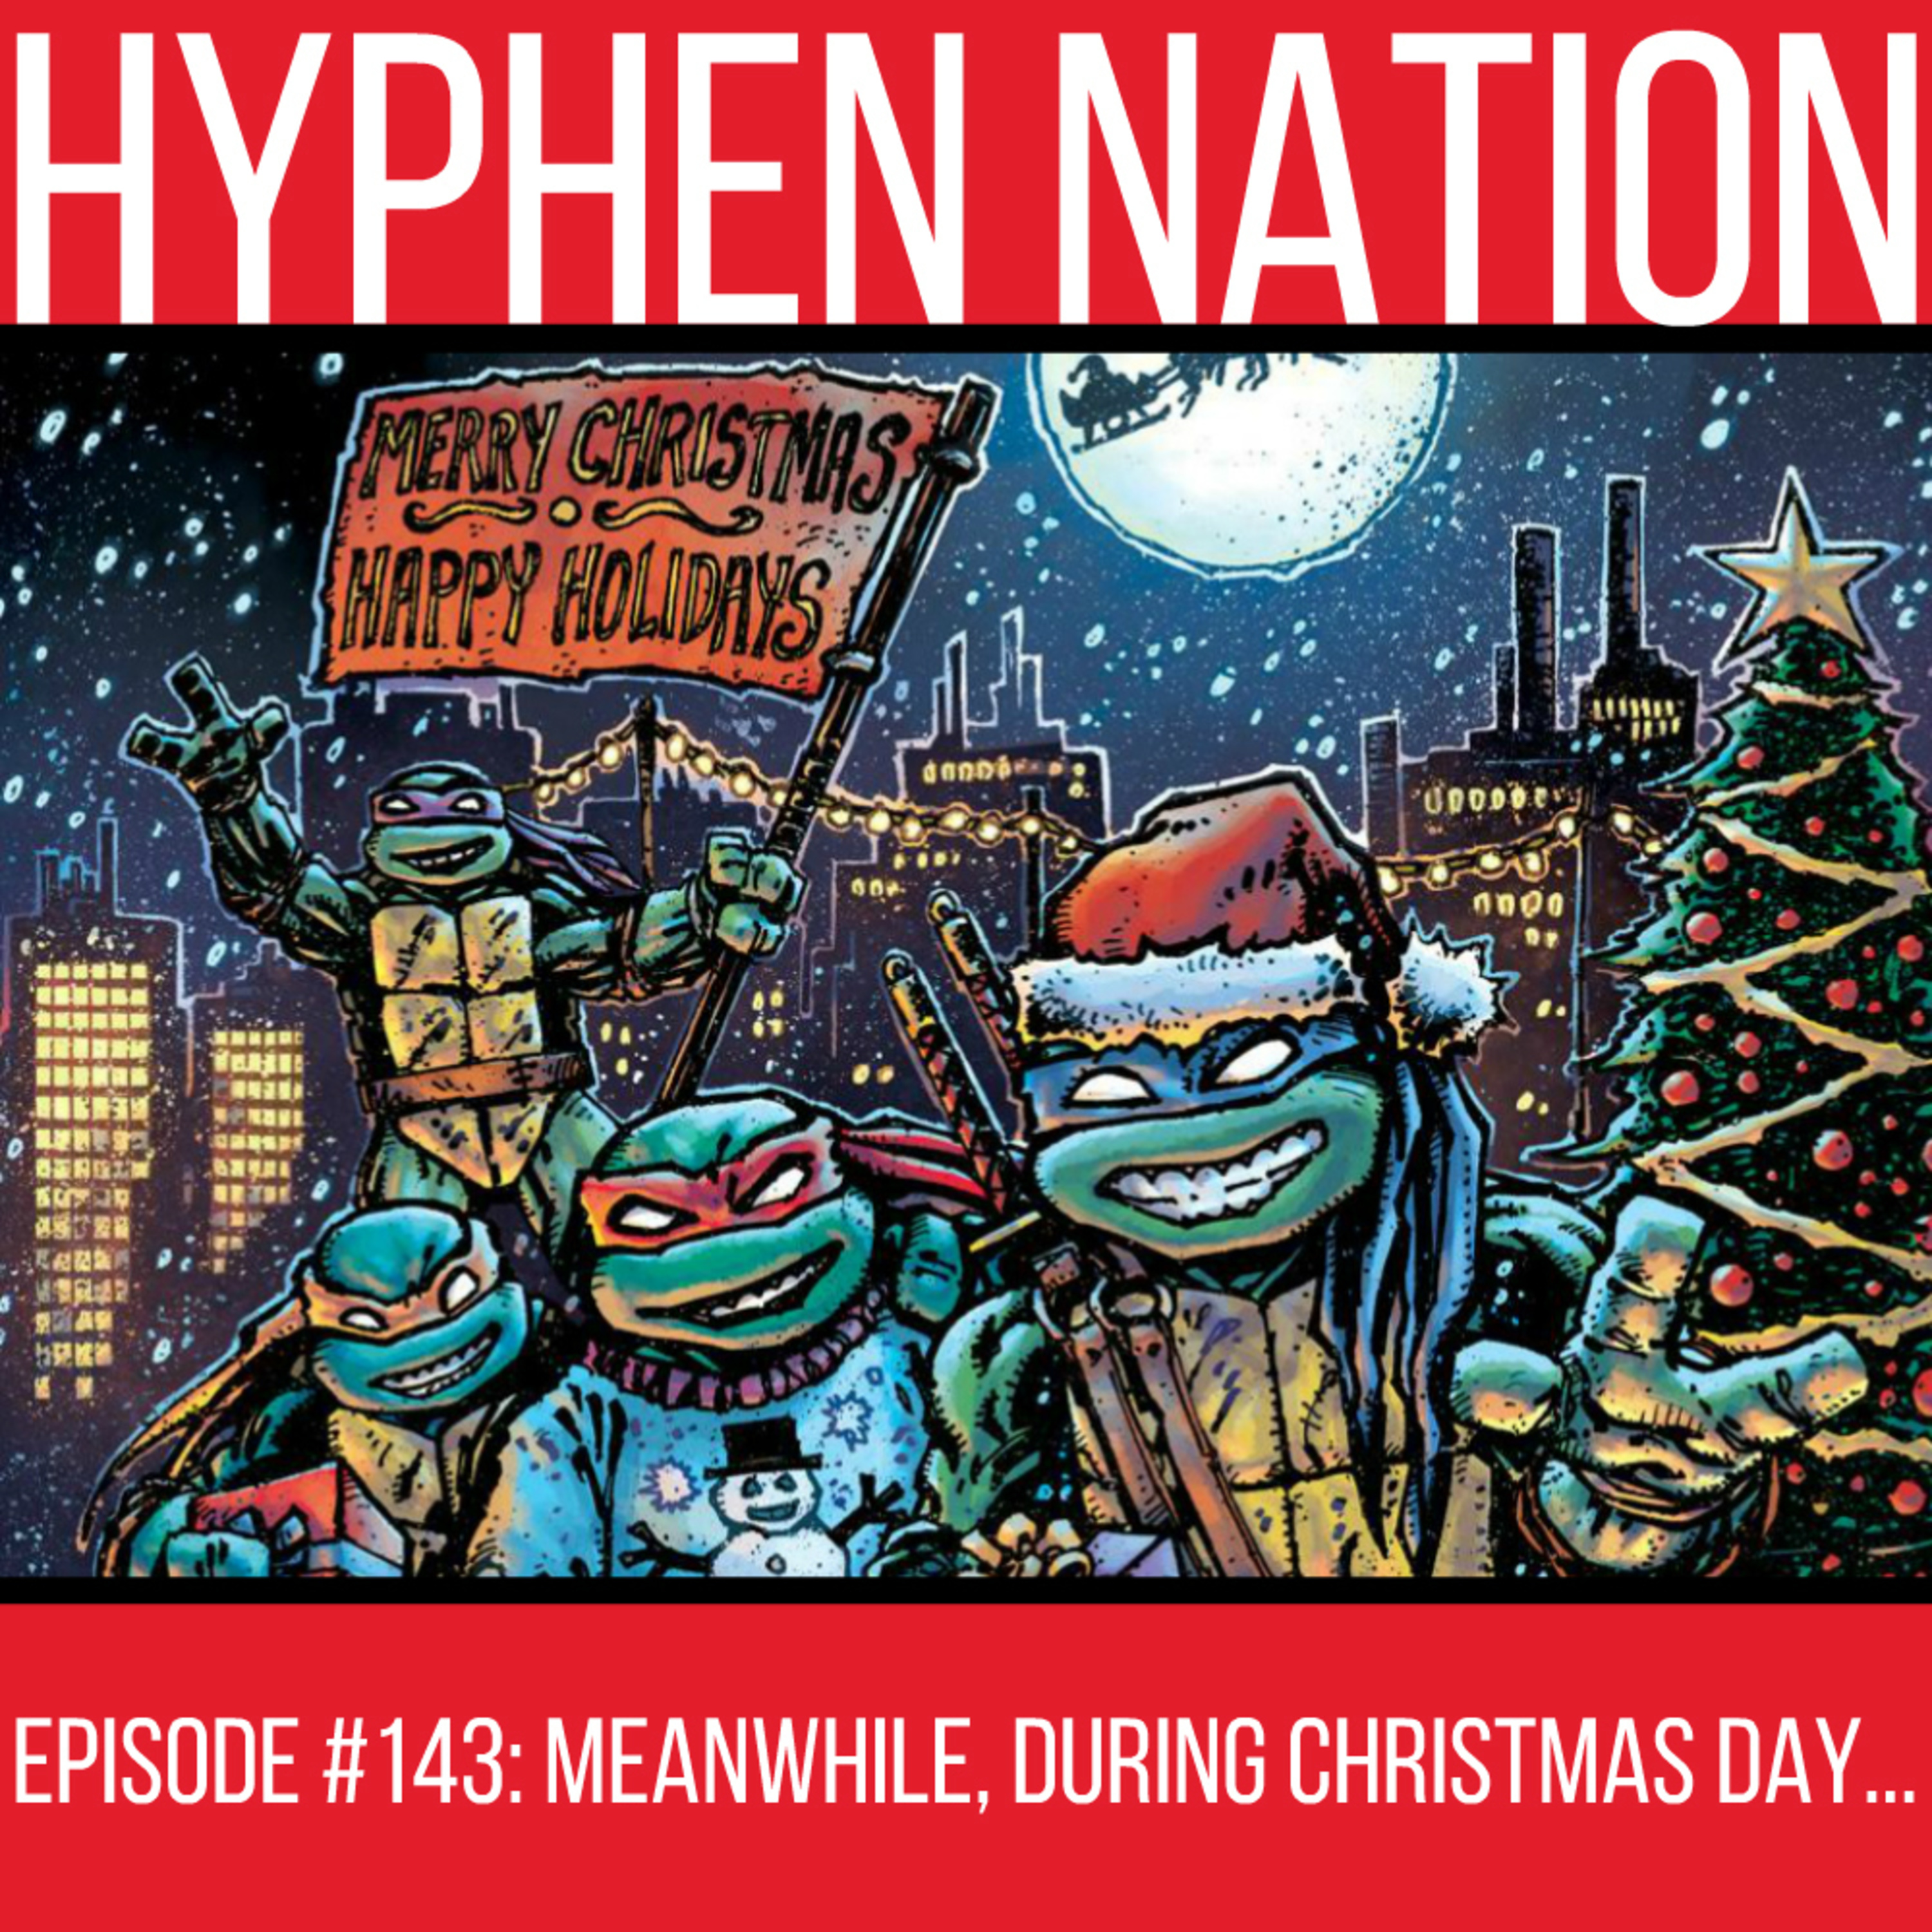 Episode #143: Meanwhile, During Christmas Day...